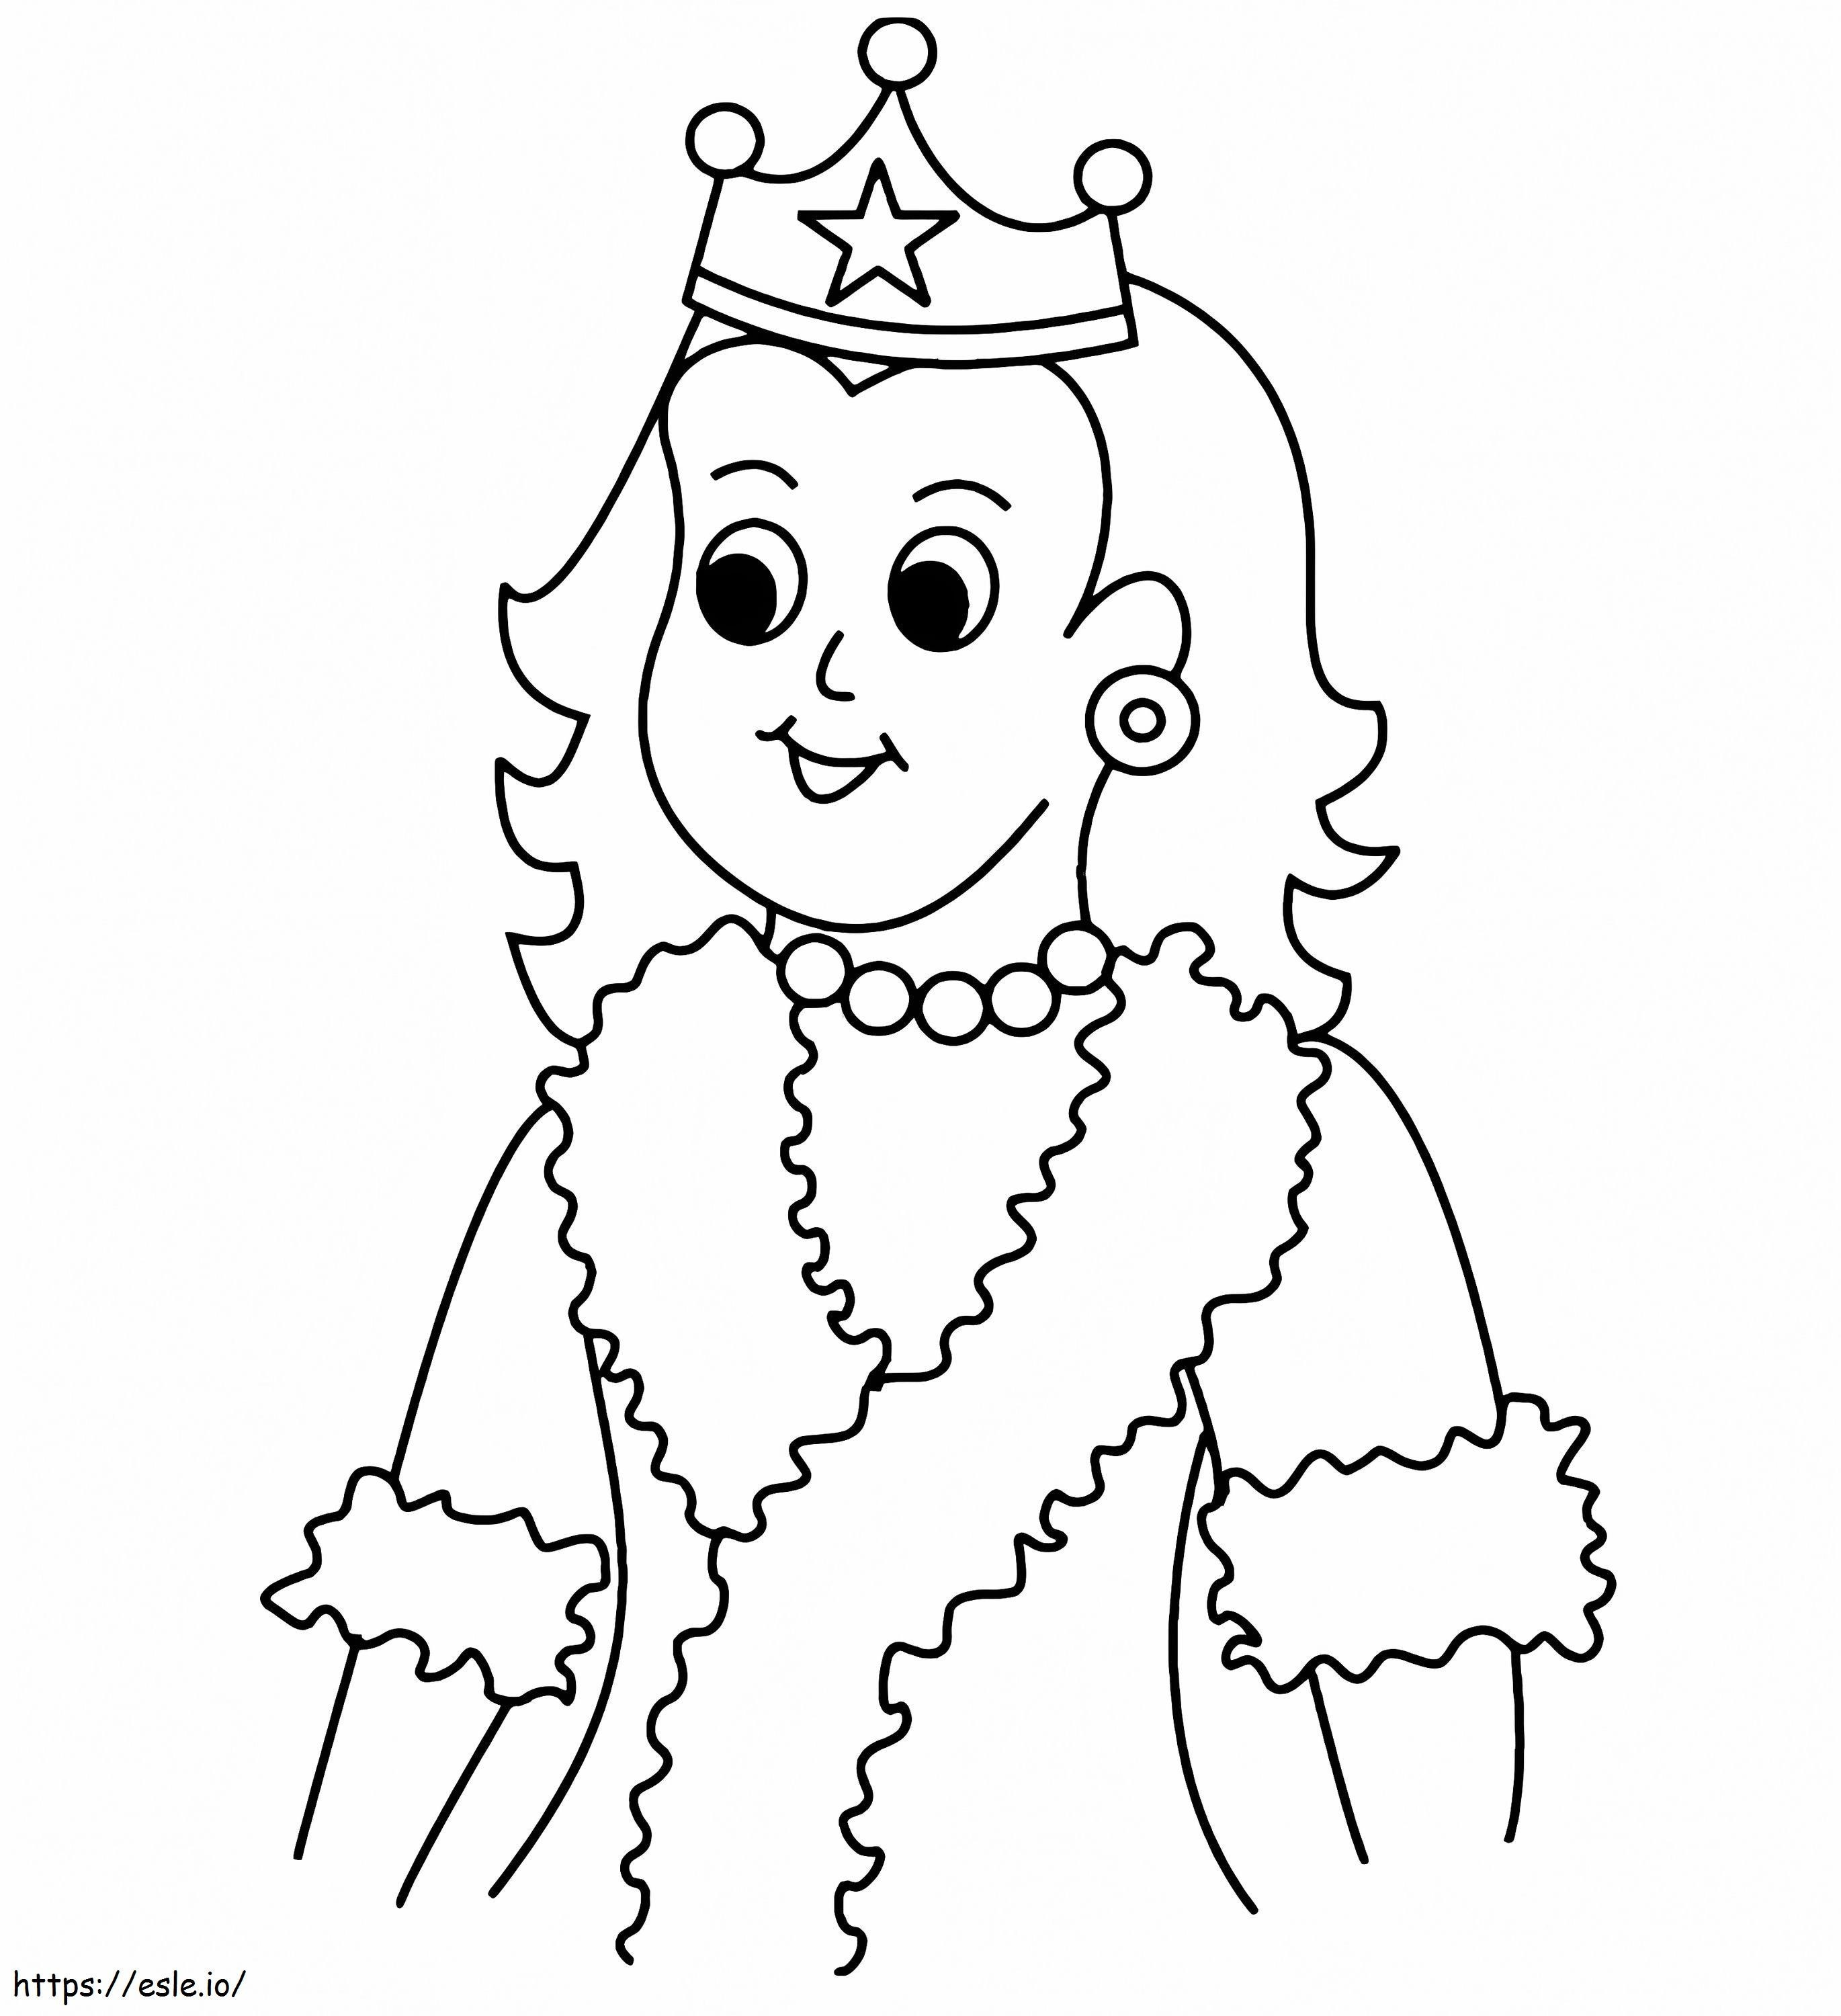 Queen Smiles coloring page